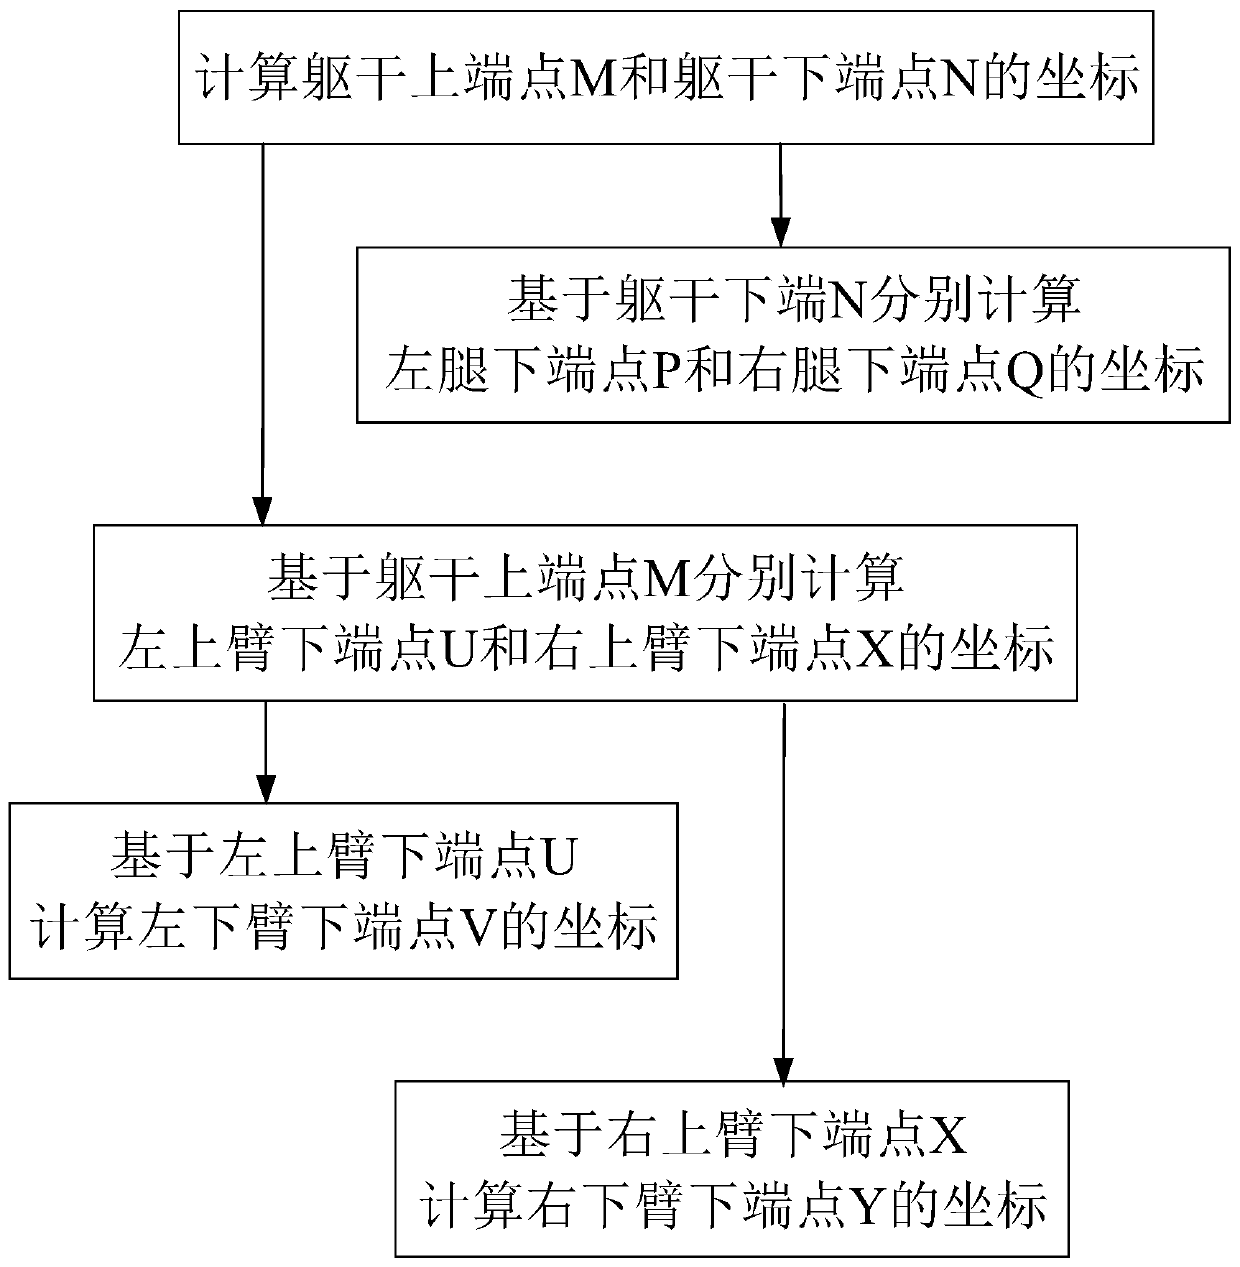 Equipment control method and device based on human body posture image